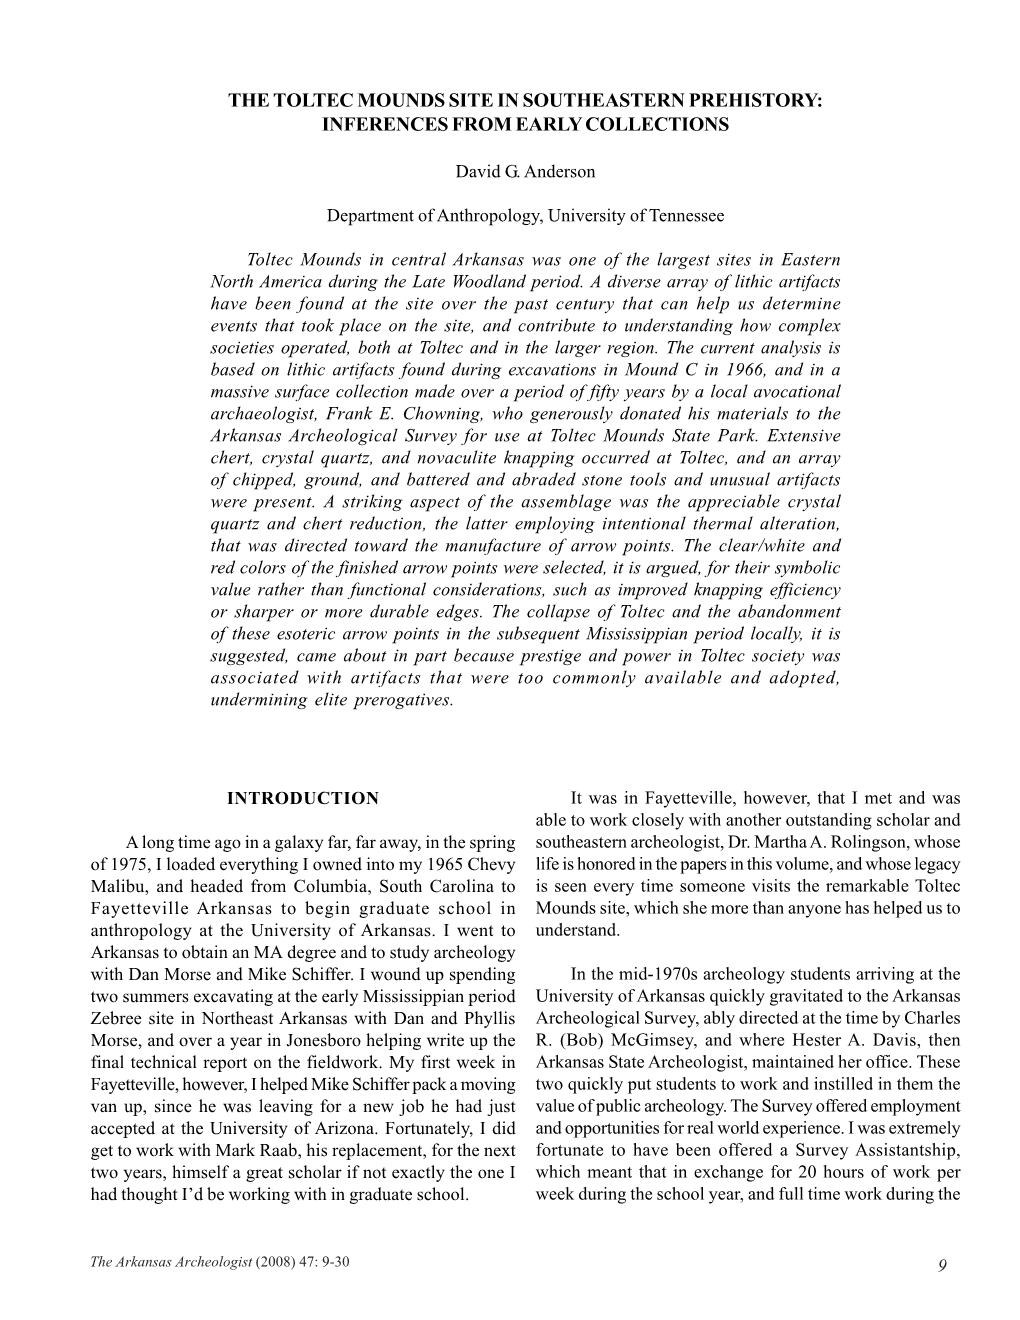 Anderson 2008 Toltec Mounds in Southeastern Prehistory.Pdf